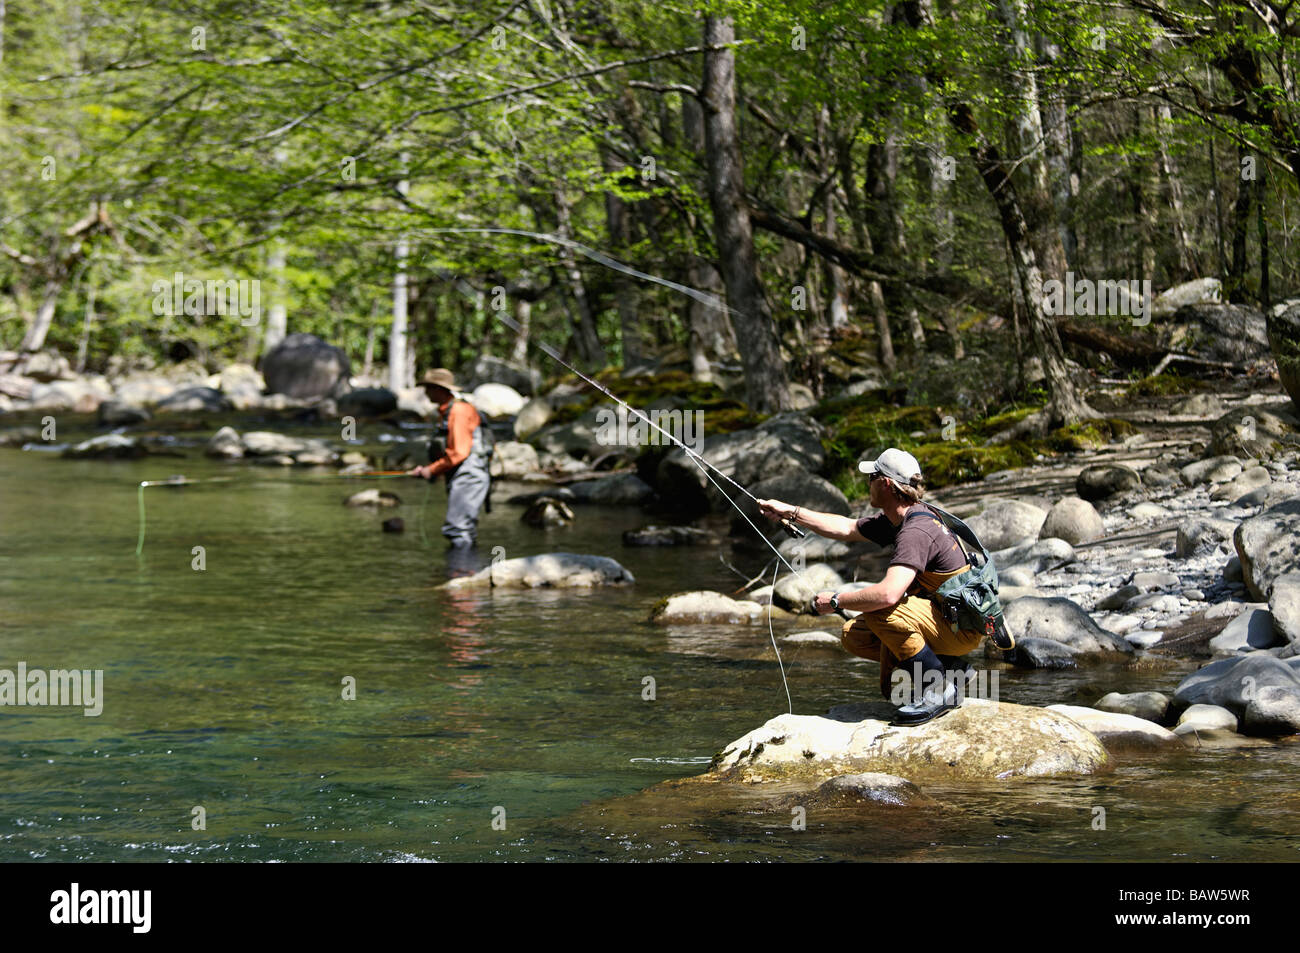 Fly Fishermen Fishing on Middle Fork of Little Pigeon River in Greenbrier Area of Great Smoky Mountains National Park, Tennessee Stock Photo